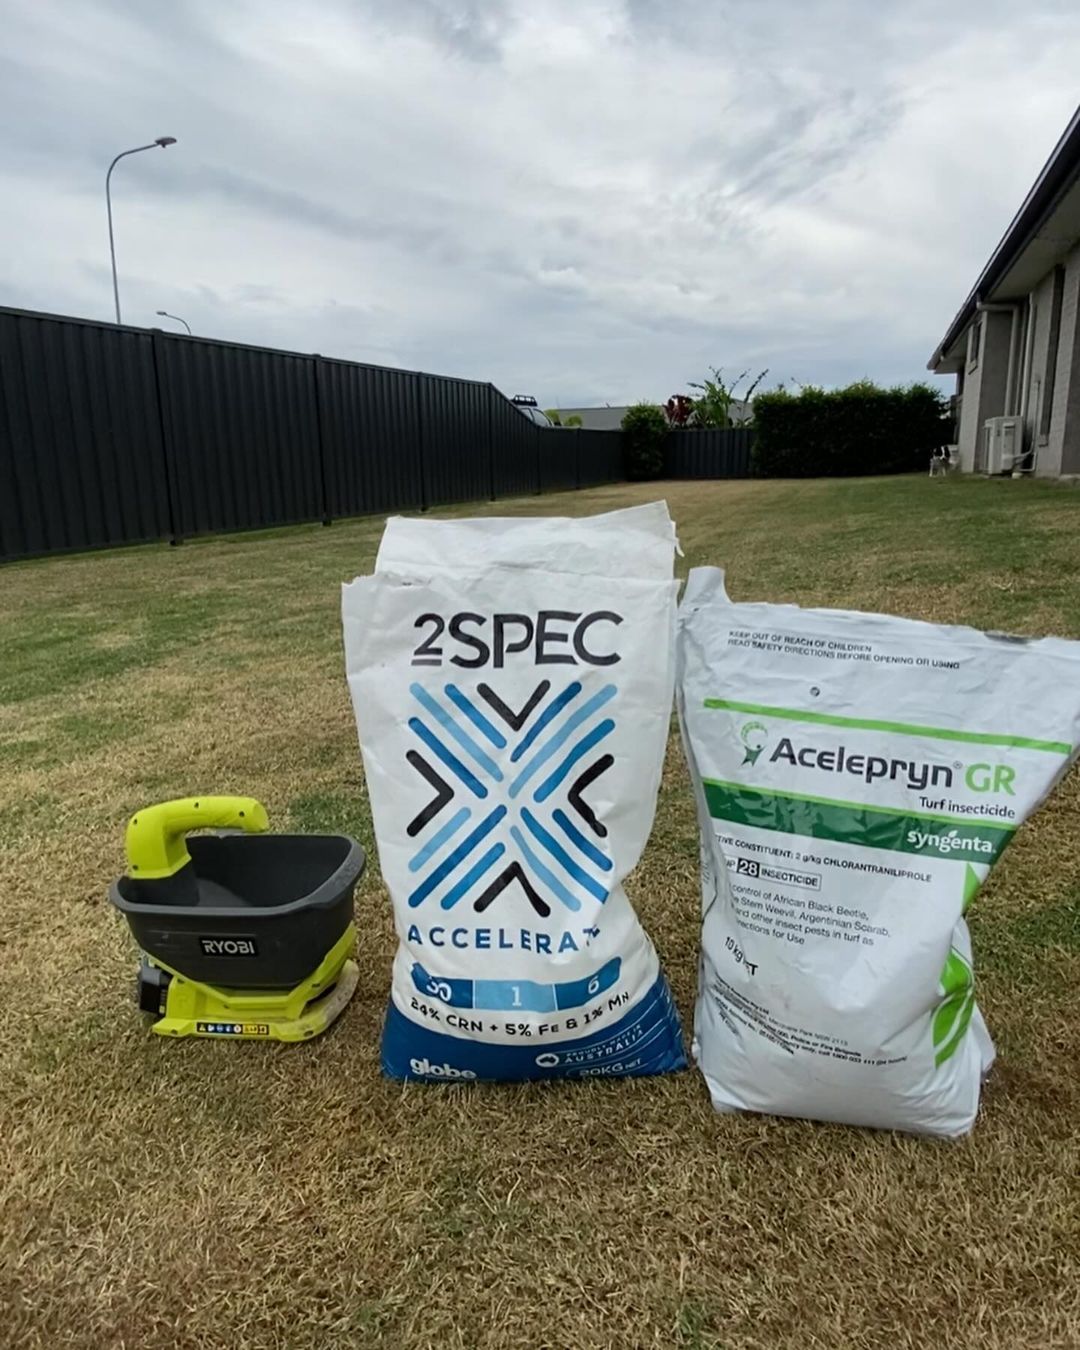 Give your lawn some TLC like @fraser_coast_lawnie (Instagram) with the RYOBI 18V ONE+ Seed & Fertiliser Spreader and the RYOBI 18V ONE+ 15L Backpack Chemical Sprayer.

Save these tools to your wish list today!

#RYOBIau #batterypowered #RYOBImade #RYOBIpowertools #LawnCare #Gardening